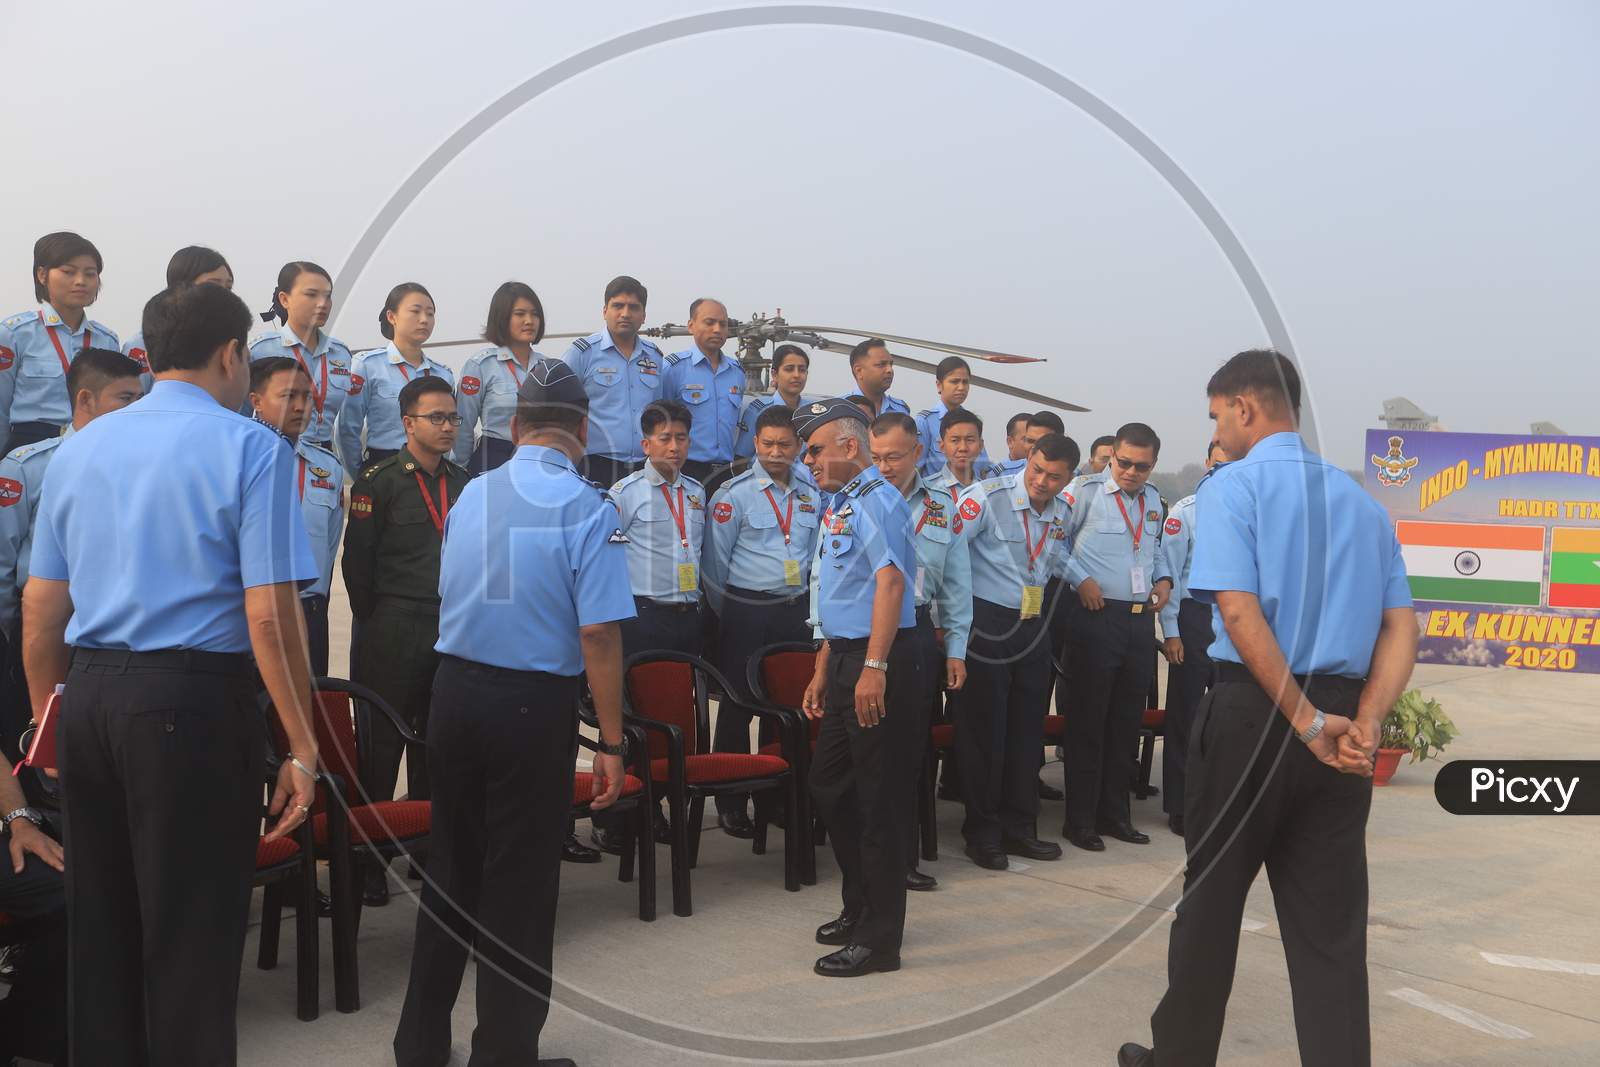 Indian Airforce Officers At an Air Base